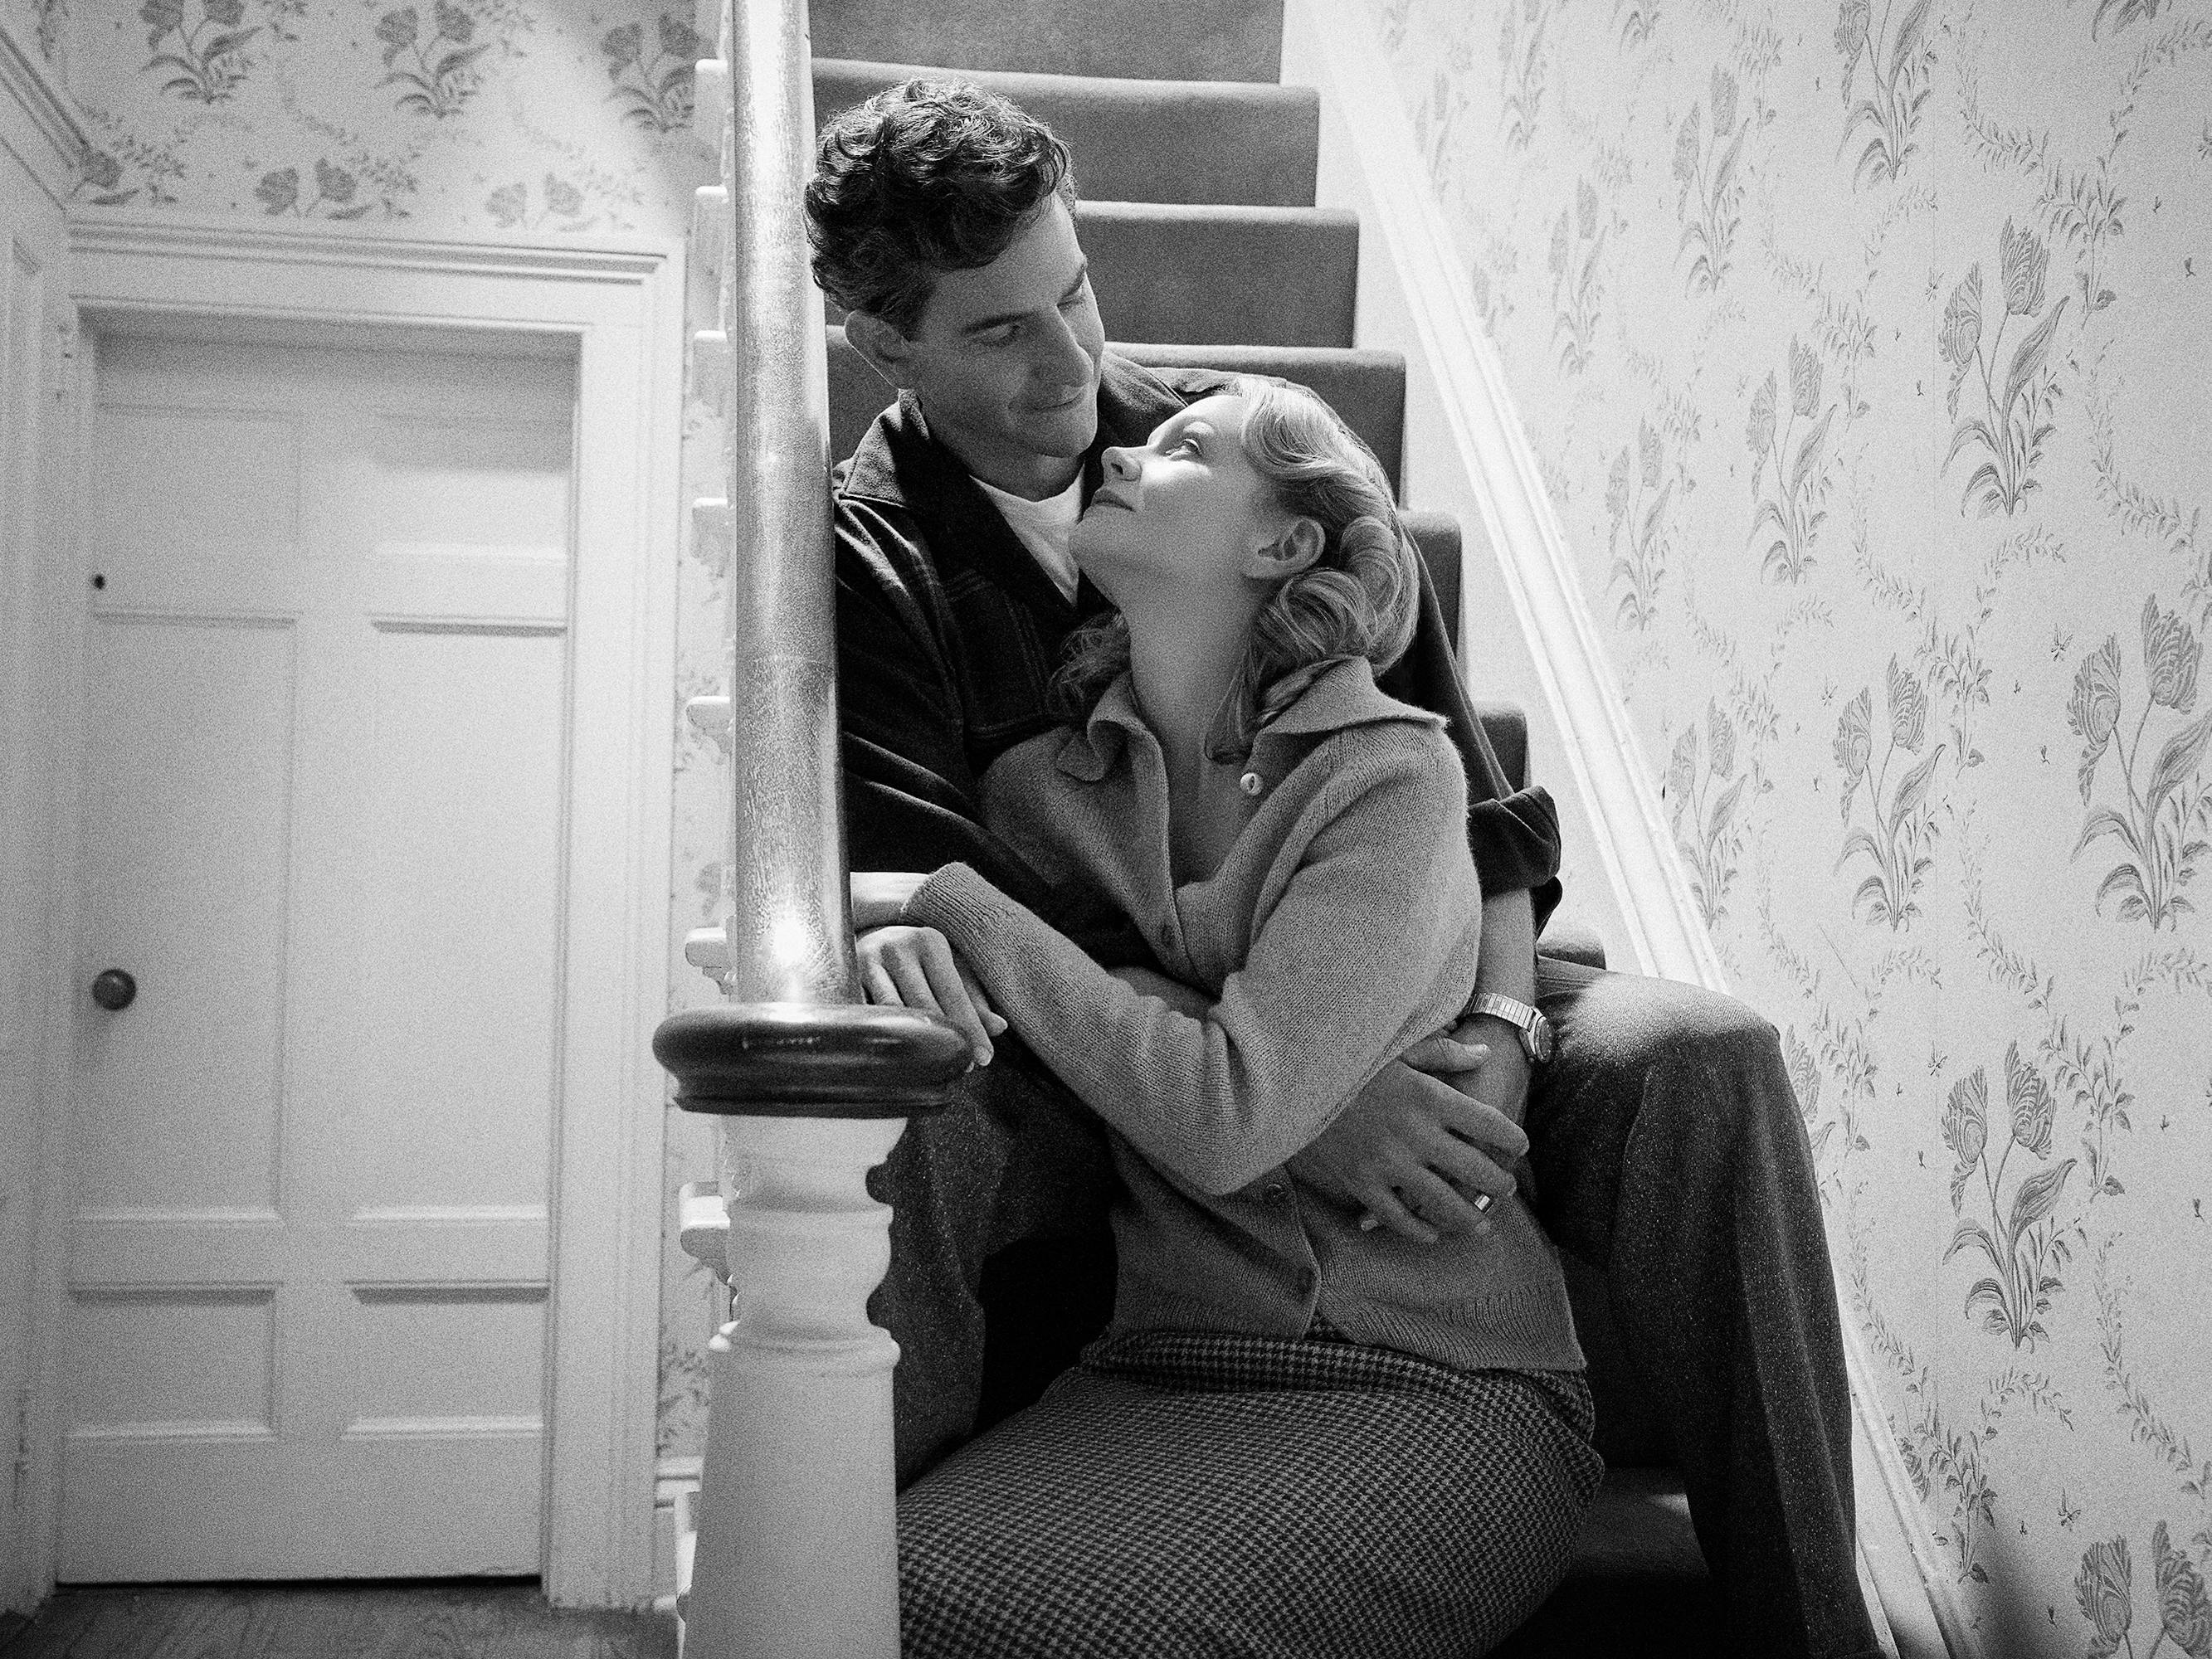 Leonard Bernstein (Bradley Cooper) and Felicia Montealegre Cohn Bernstein (Carey Mulligan) sit on the stairs together. The walls behind them are painted with patterned wallpaper. 